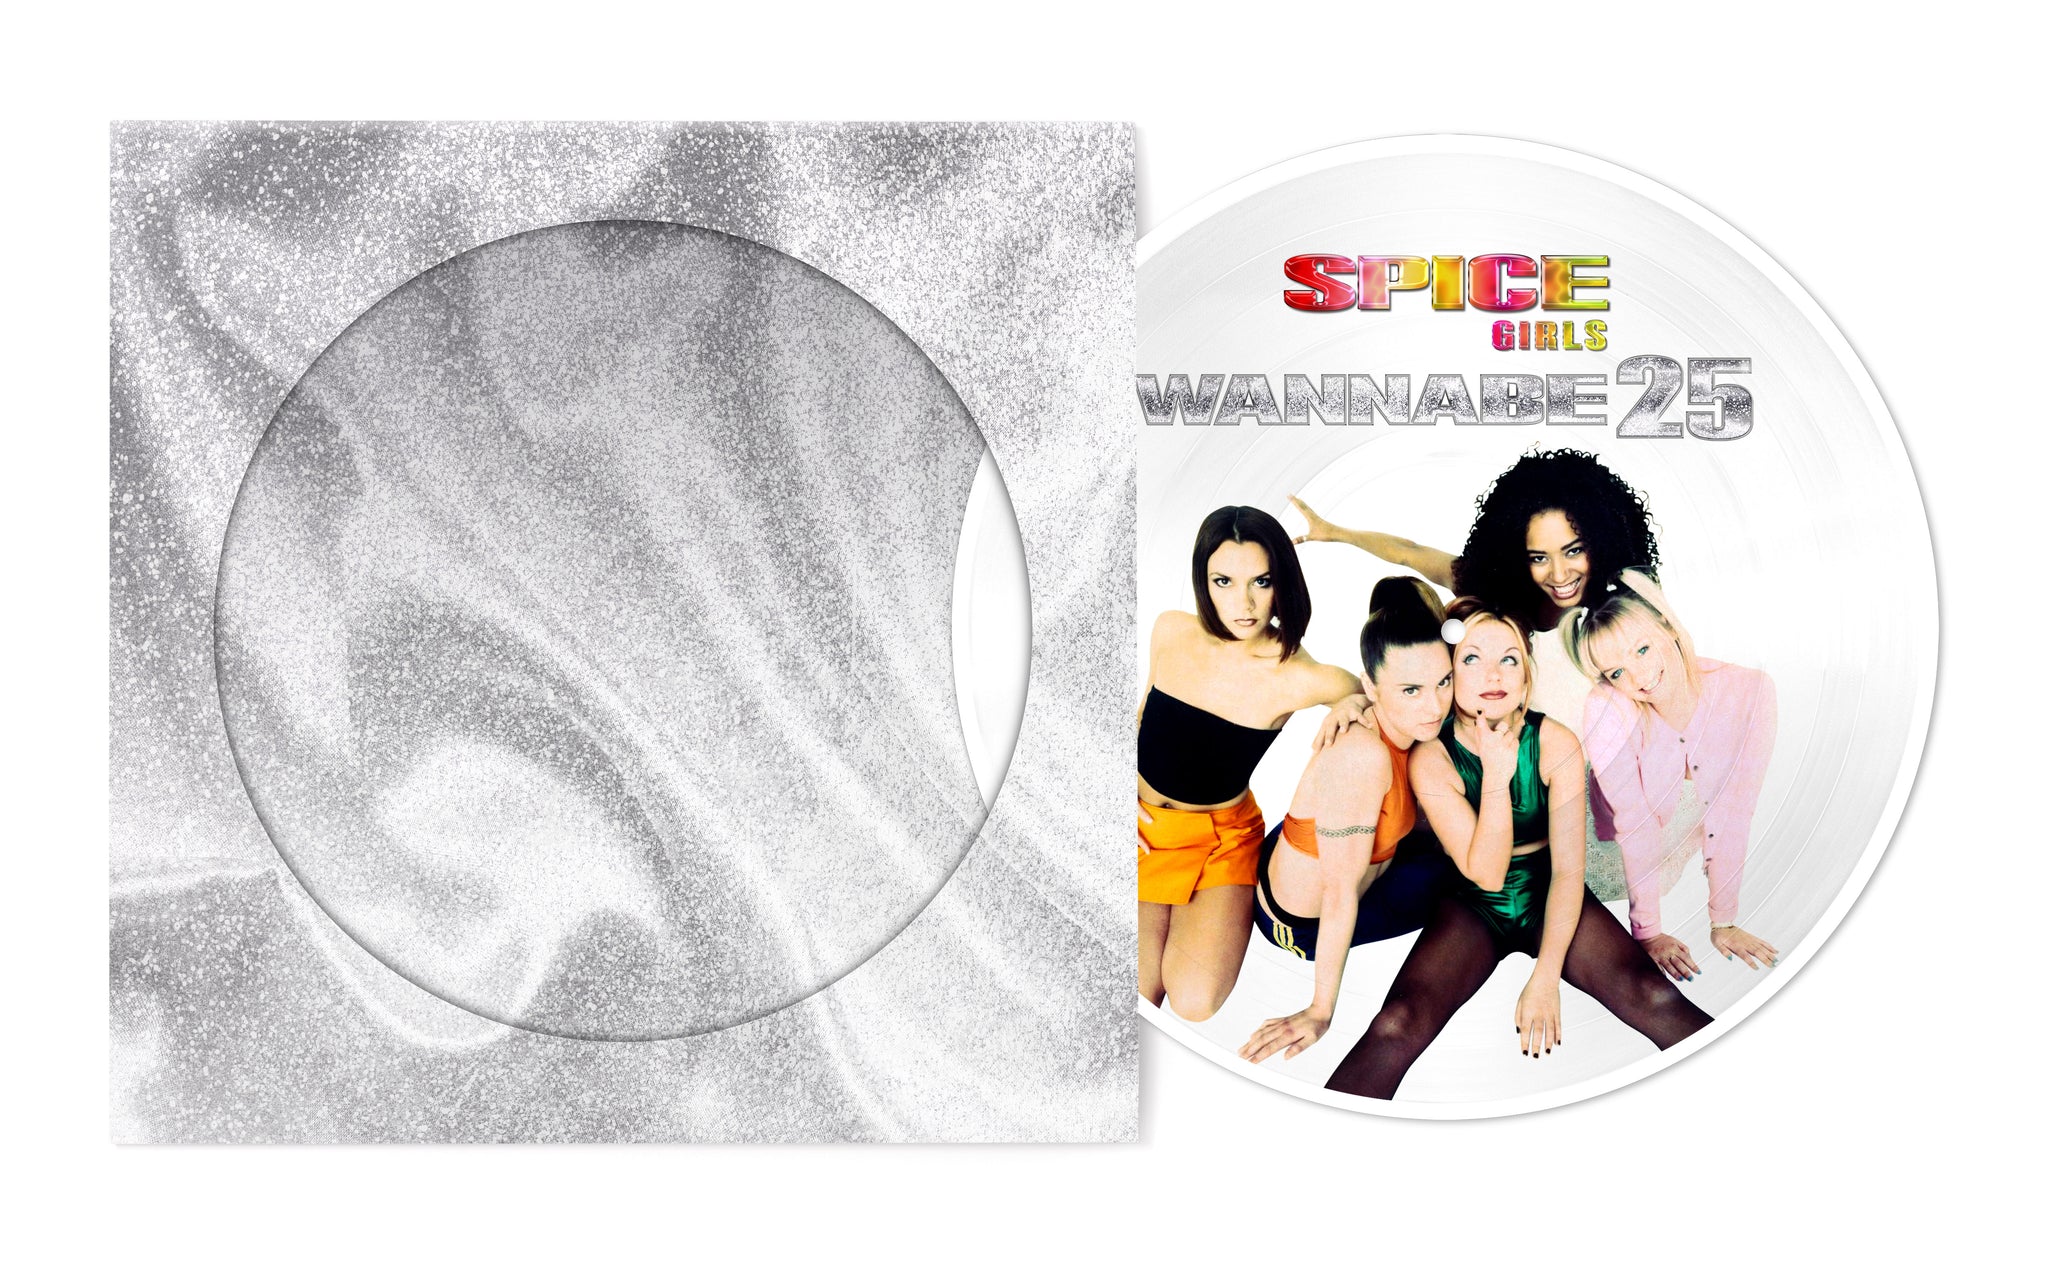 Spice Girls - Wannabe (25th Anniversary Limited Edition 12" Picture Disc)